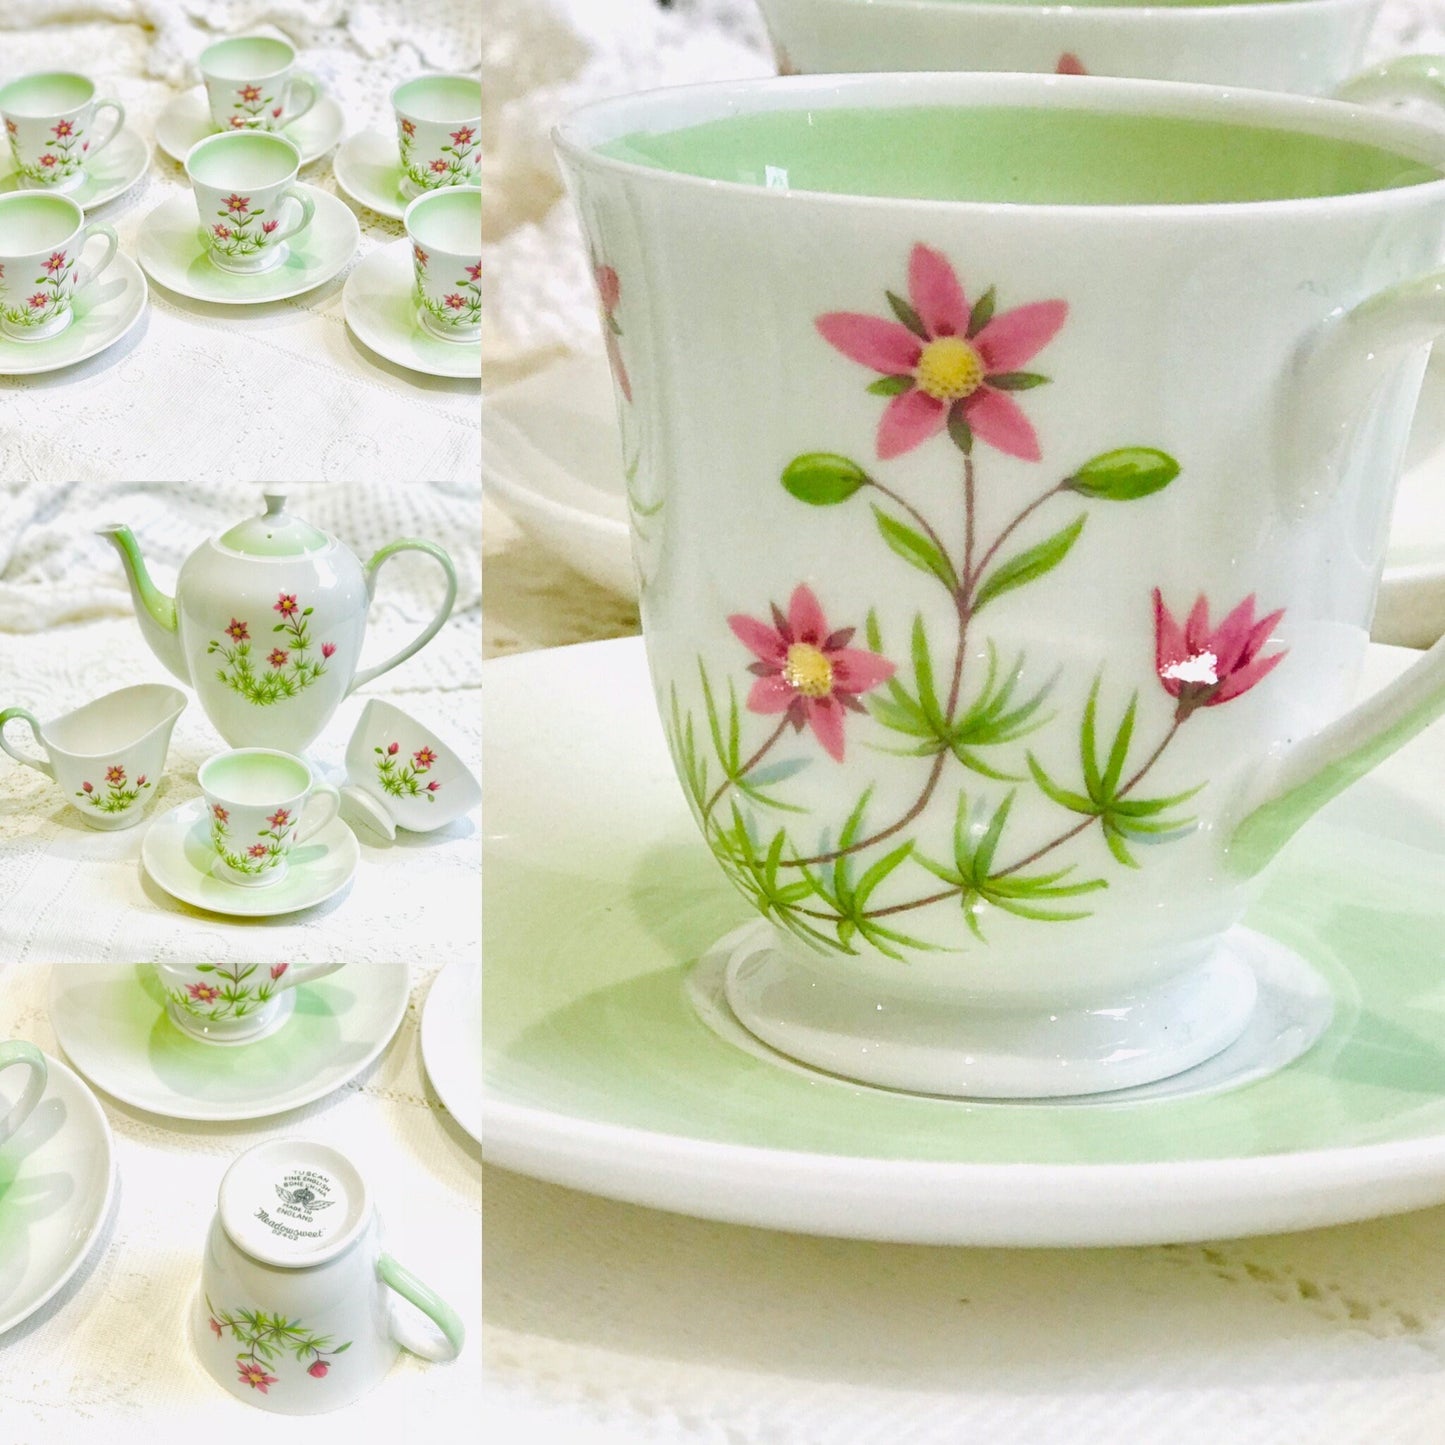 Vintage Coffee Set by Tuscan China in England ceramic Cups Saucers Coffee Pot pretty summer flowers